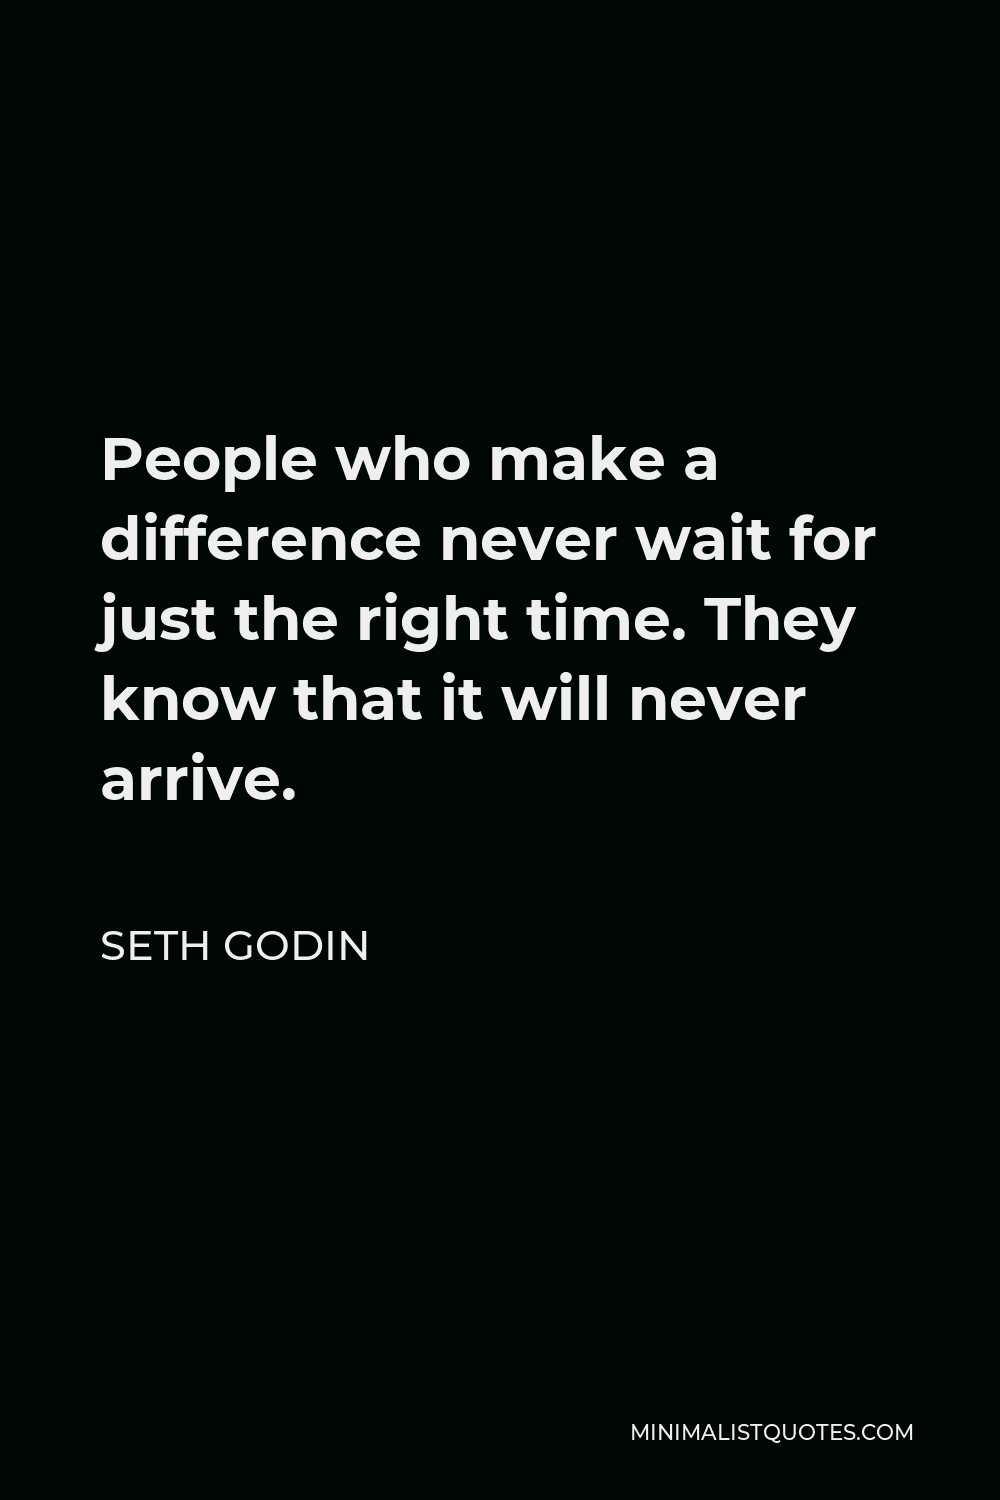 Seth Godin Quote - People who make a difference never wait for just the right time. They know that it will never arrive.